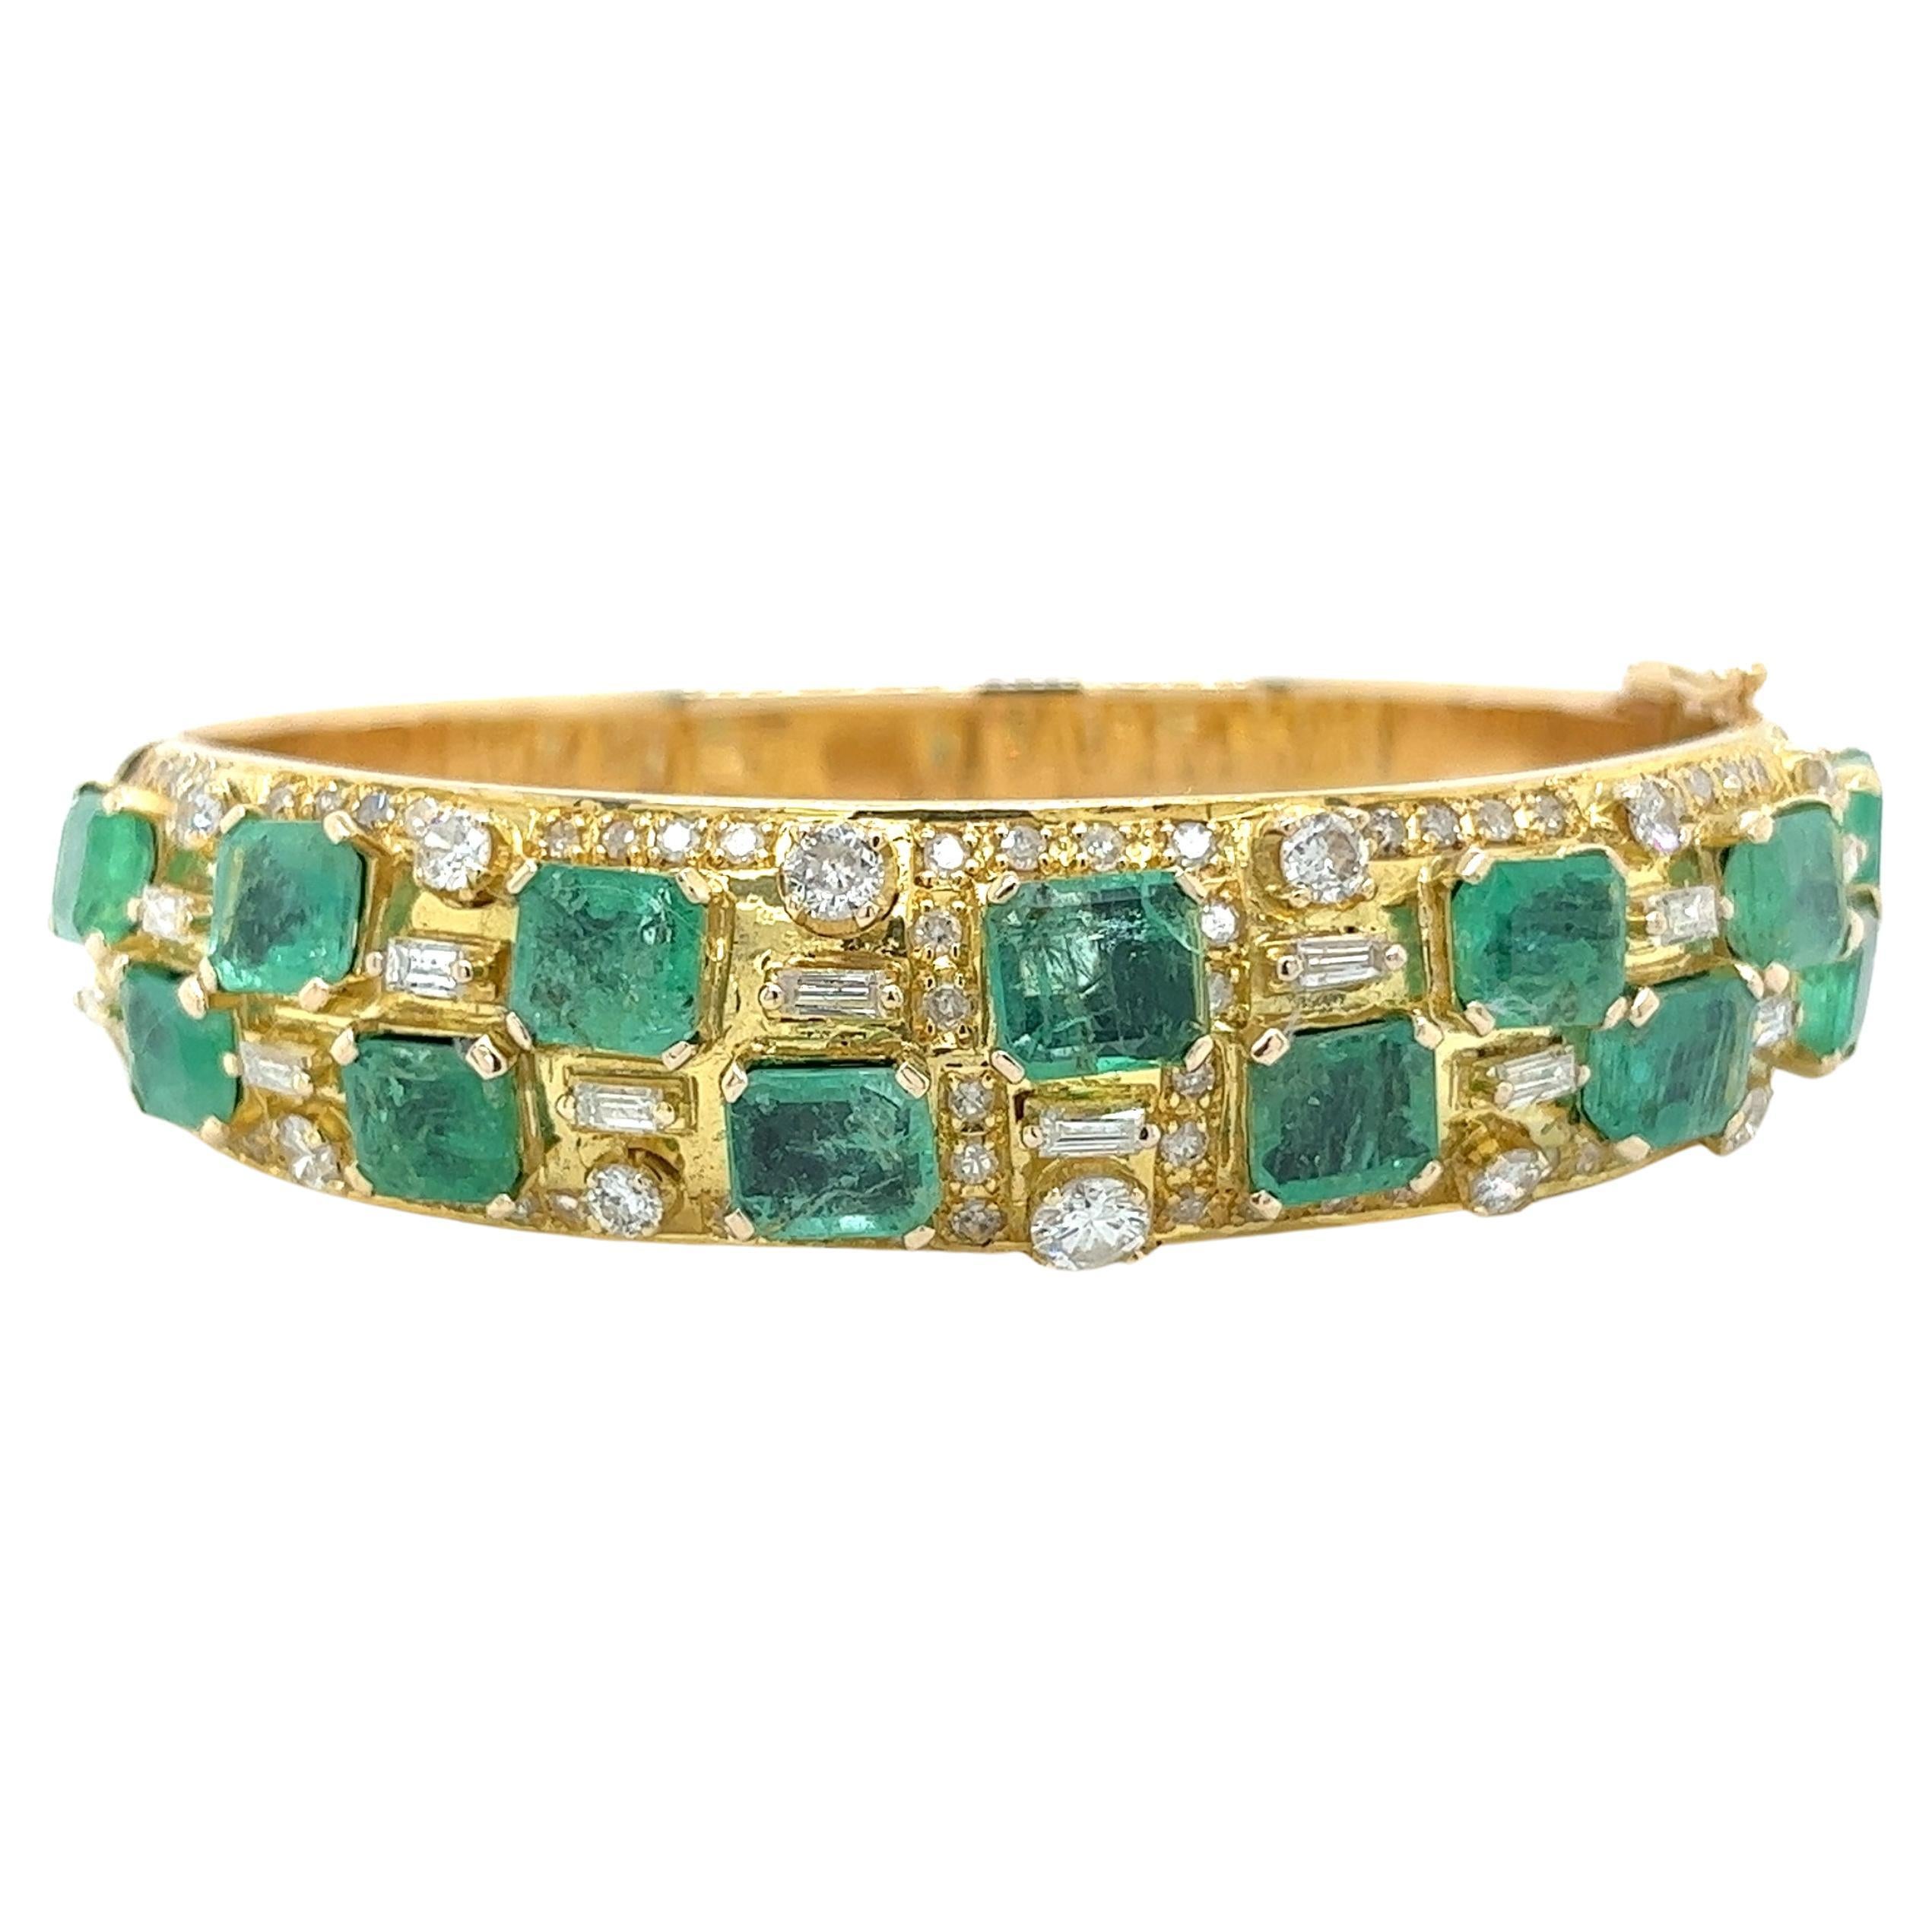 Vintage, art deco-inspired natural emerald and diamond bangle bracelet in 18 karat yellow gold. Featuring 13 square emerald cut emeralds of 13 carats total, with a stunning assortment of varying-sized round and baguette-cut diamonds.